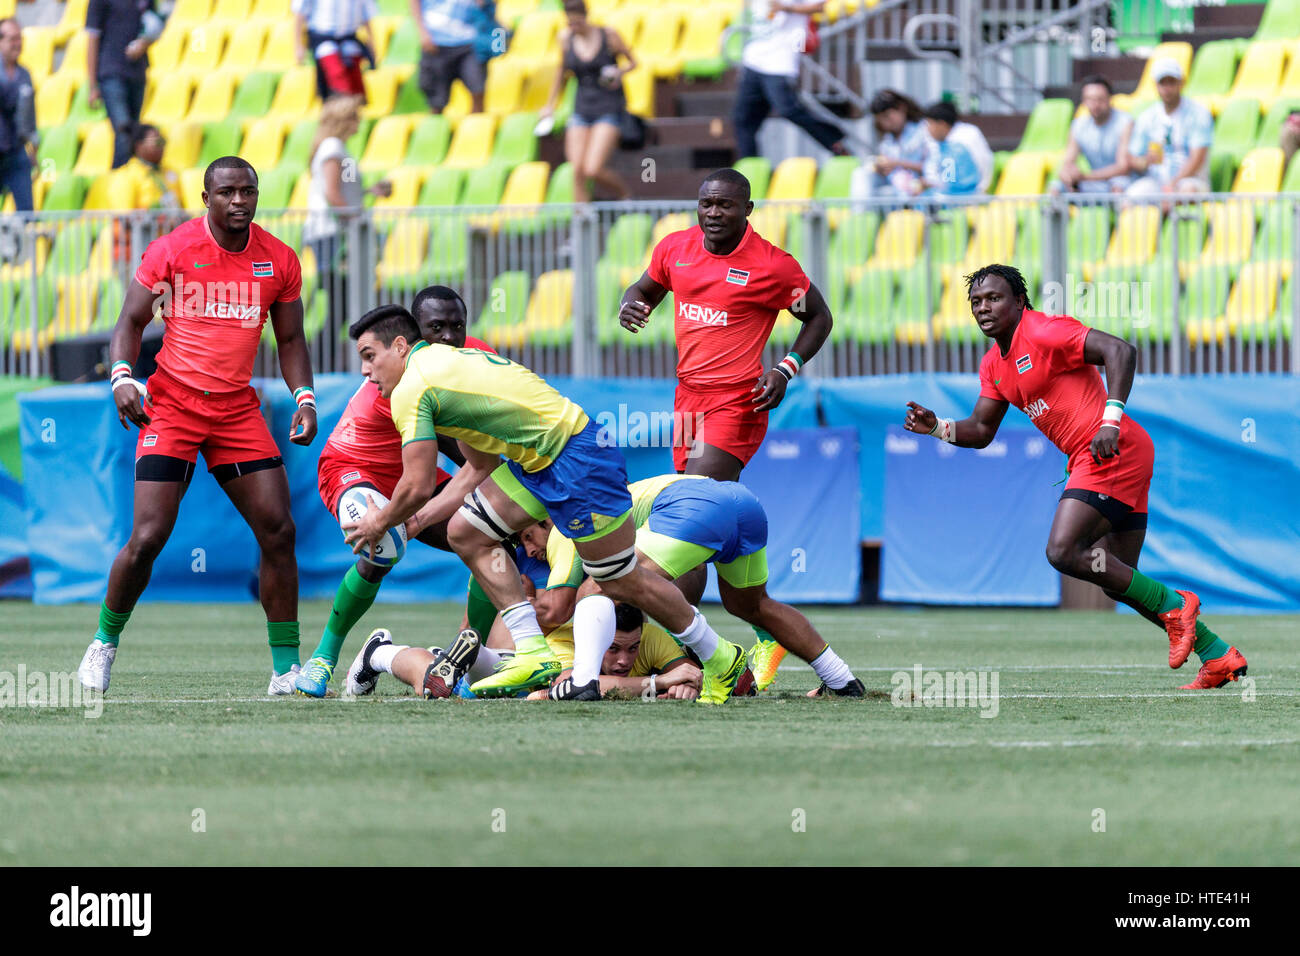 Rio de Janeiro, Brazil. 11 August 2016 Felipe Sancery (BRA) competes in the Men's  Rugby Sevens in a match vs. Kenya at the 2016 Olympic Summer Games. Stock Photo